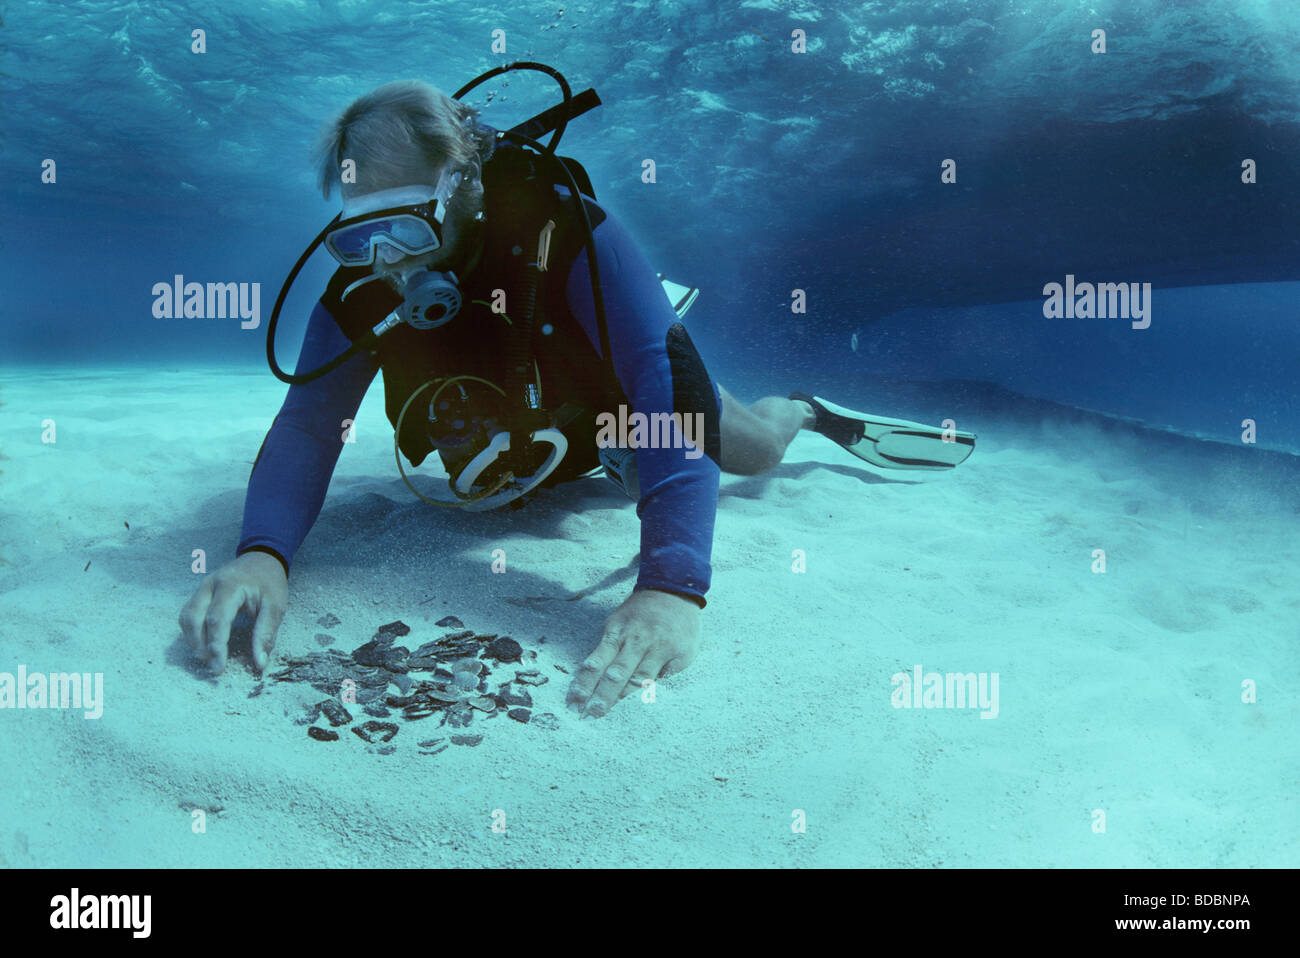 Diver recovers coins from the shipwreck Las Maravillas sunk in 1658 Bahamas  Stock Photo